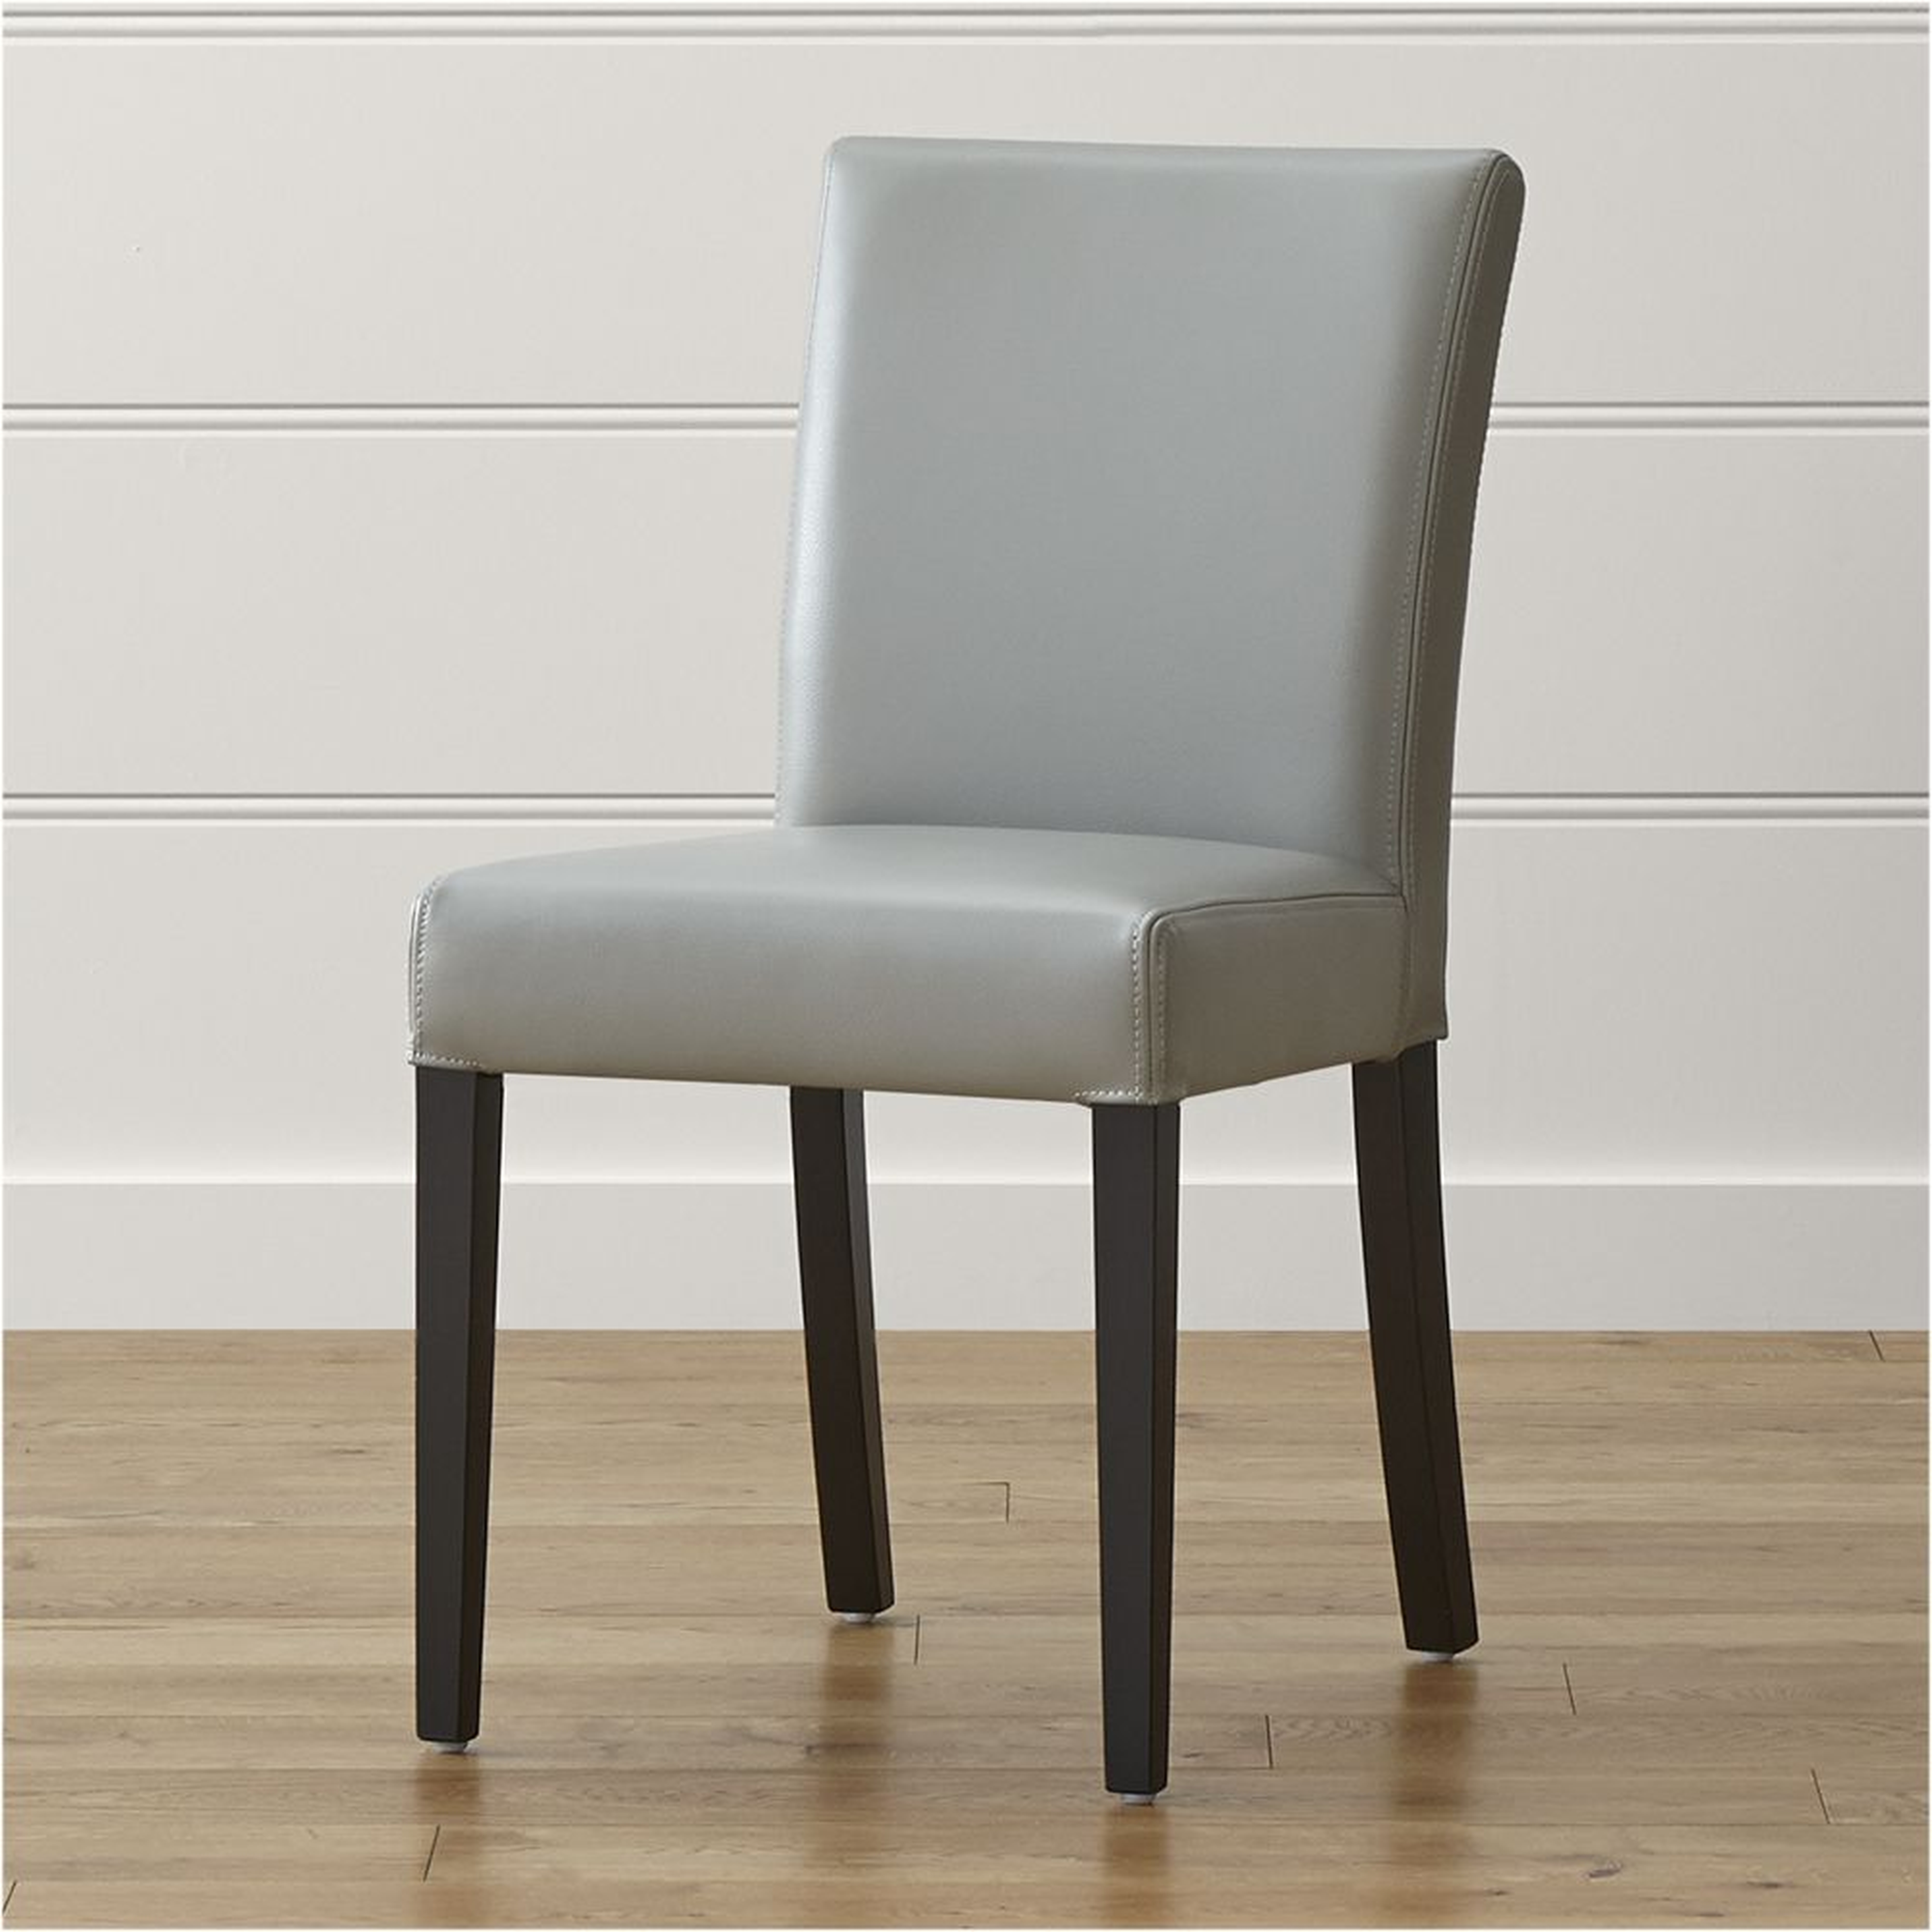 Lowe Pewter Leather Dining Chair - Crate and Barrel